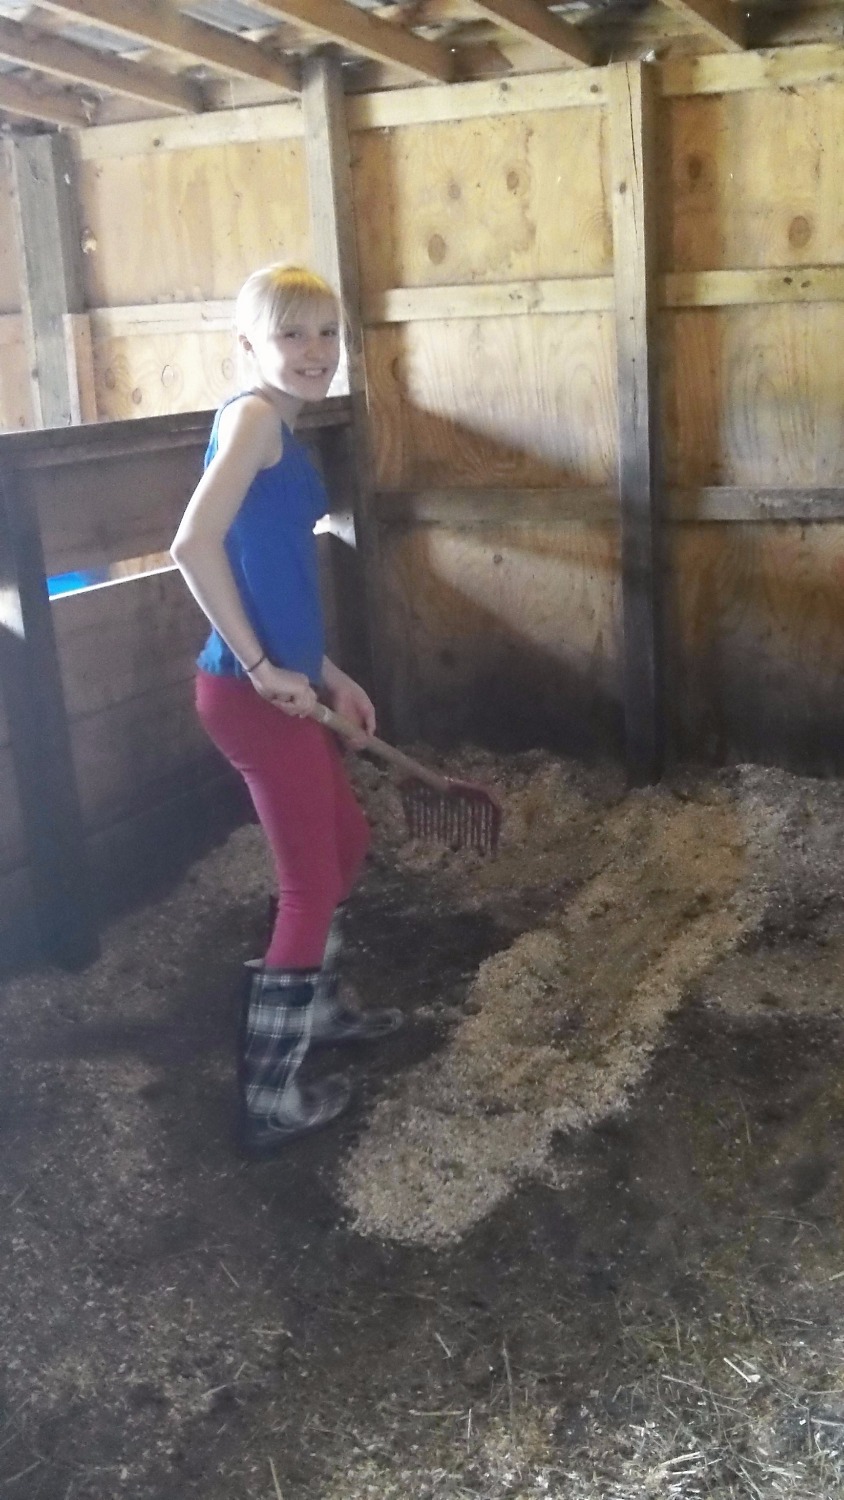 Mucking a stable.